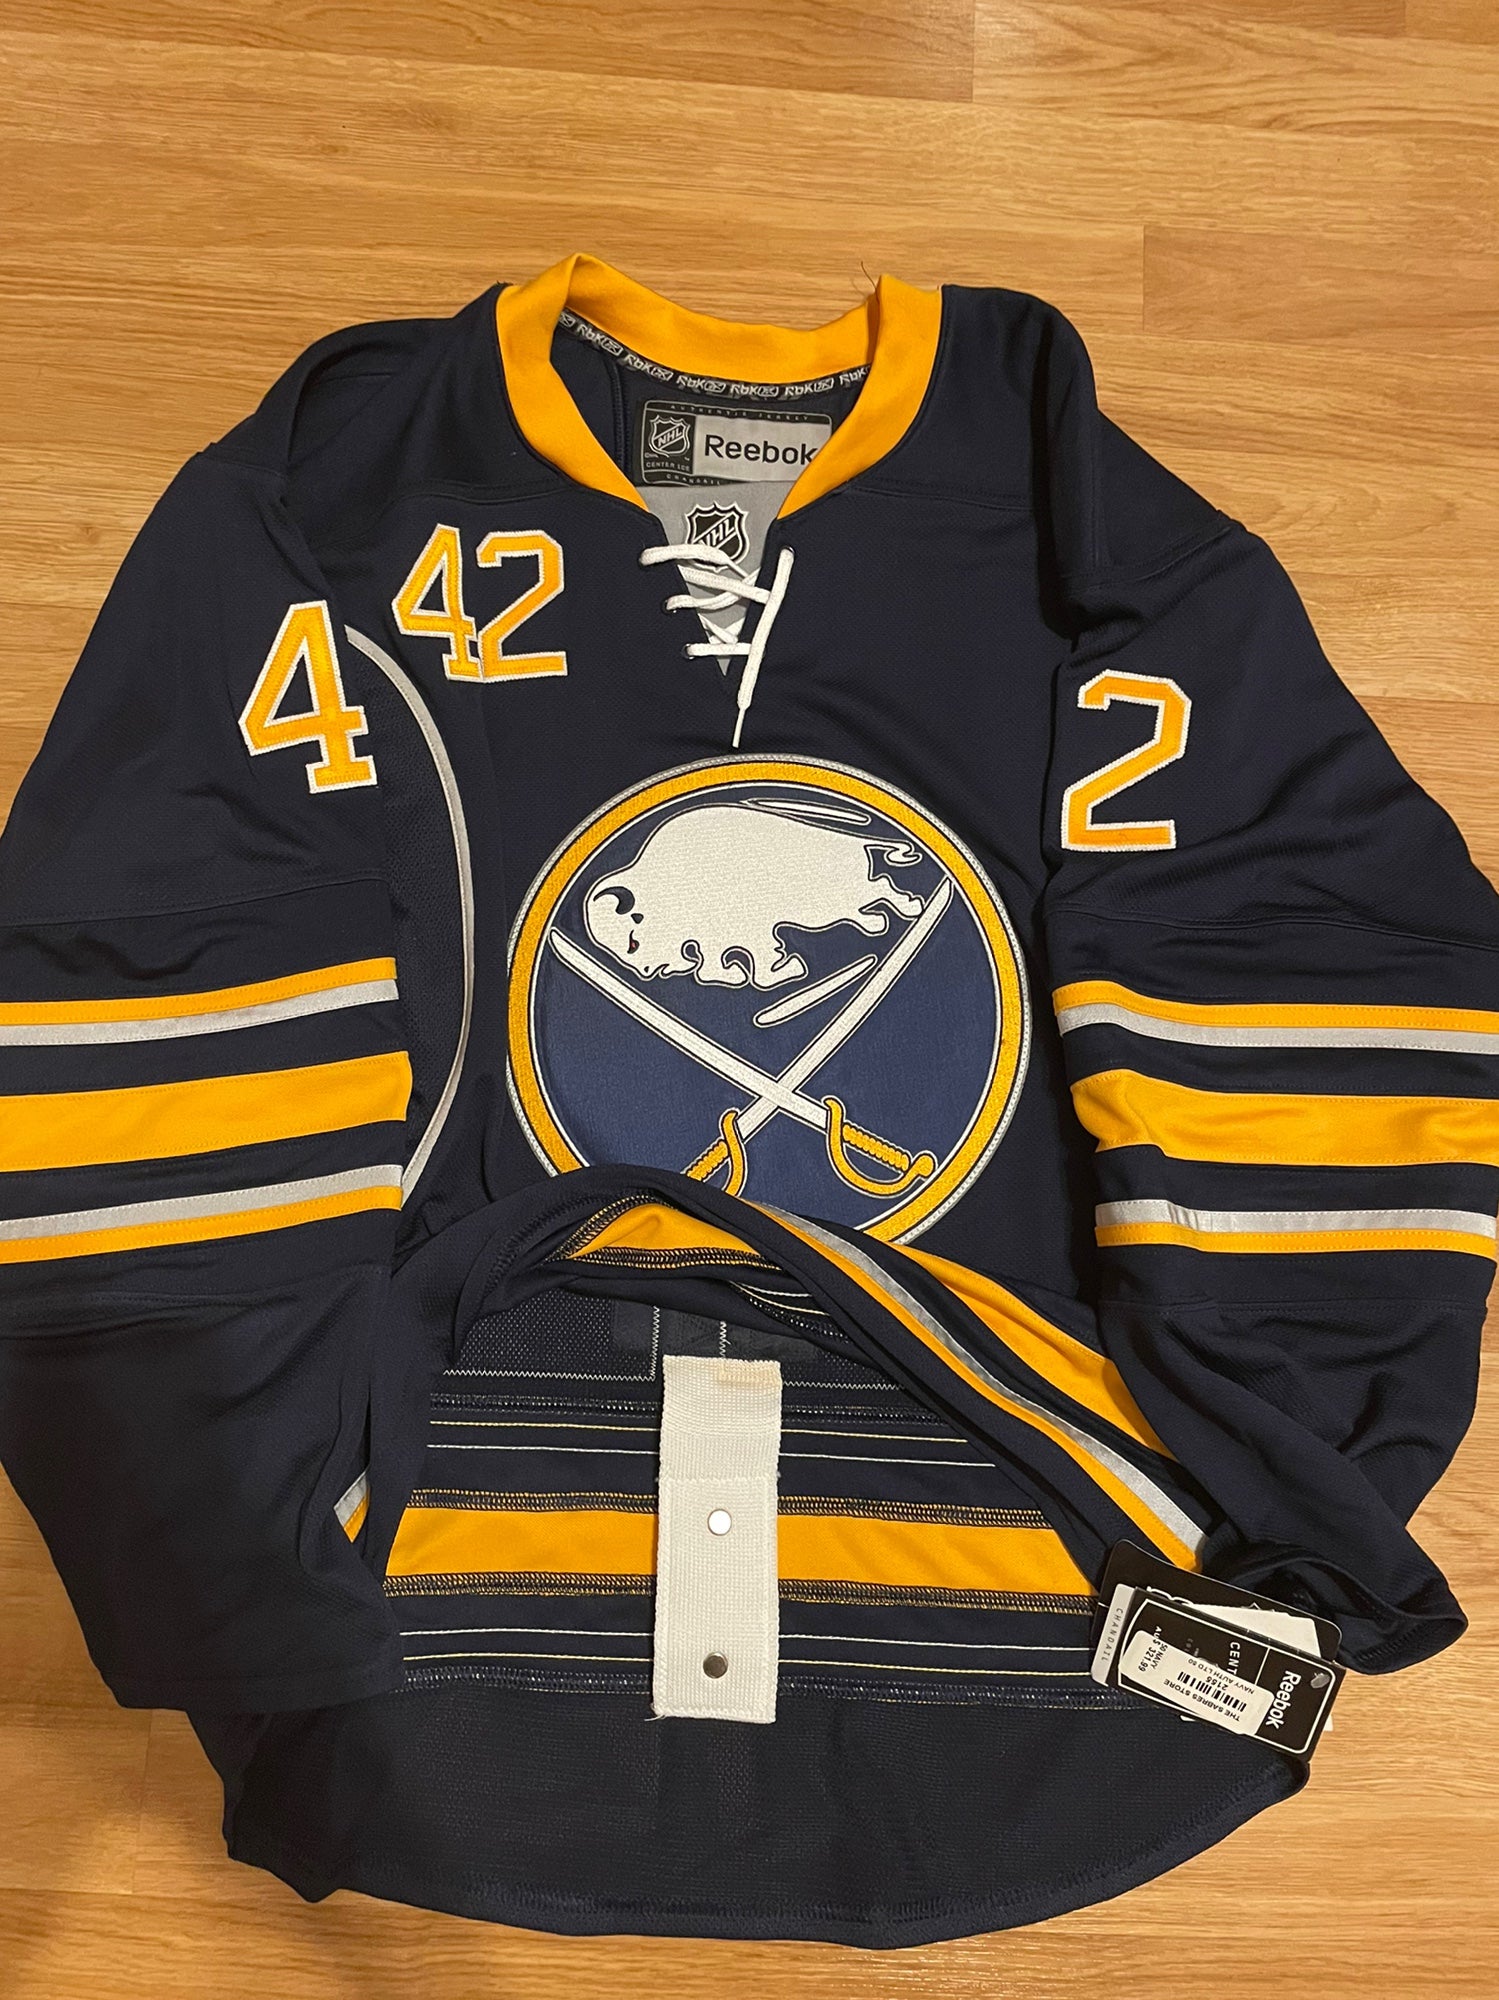 CCM Hasek Goat Head Authentic Buffalo Sabres NHL Hockey Jersey White Home  48